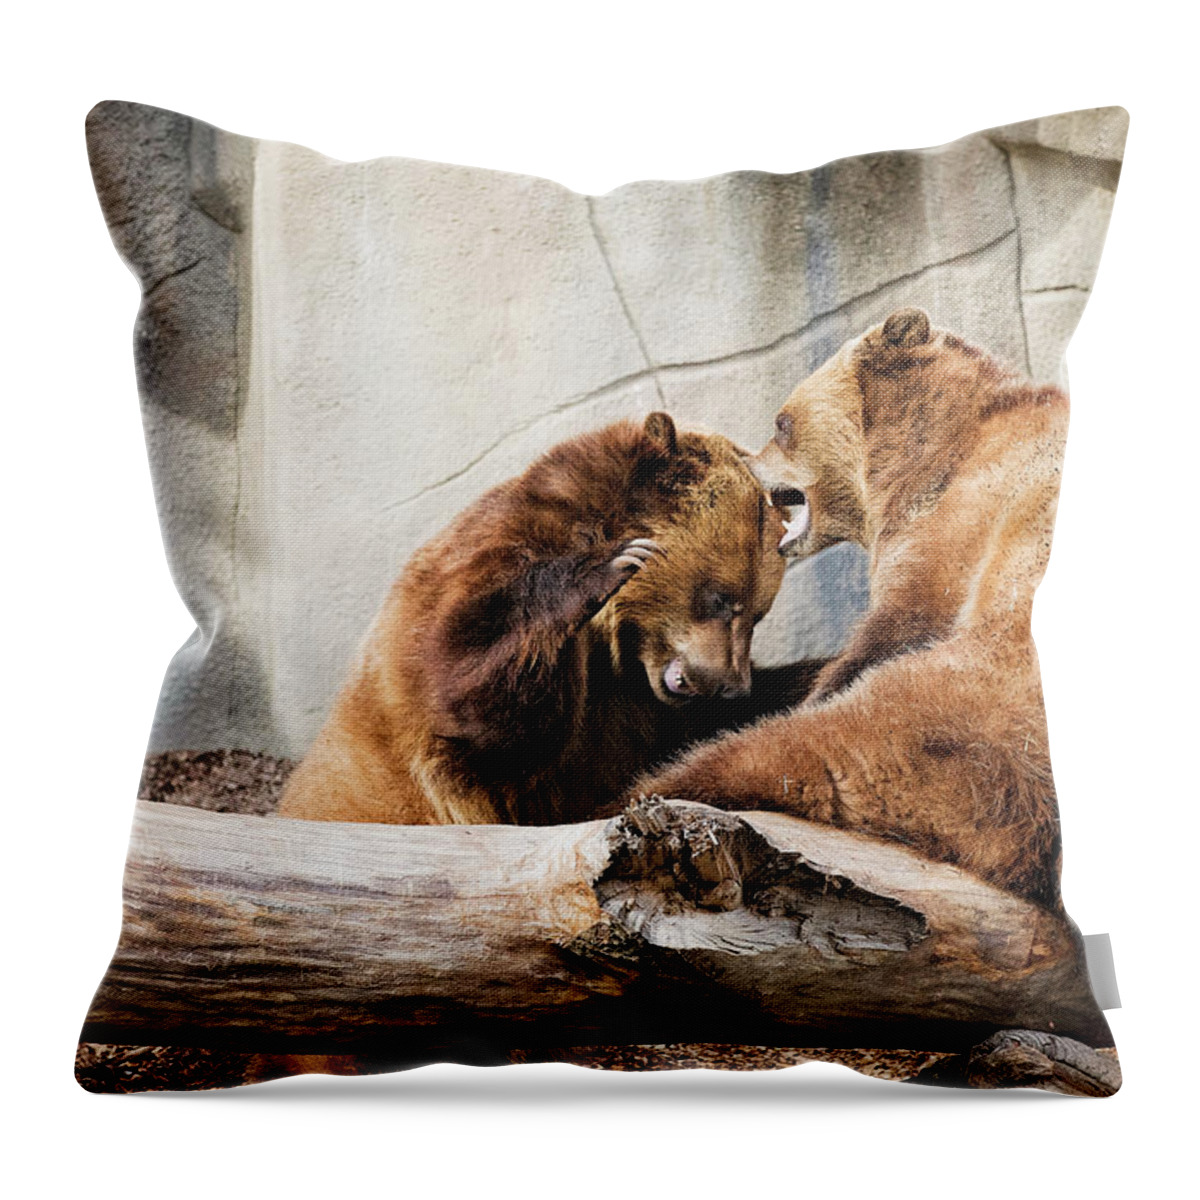 Grizzly Throw Pillow featuring the photograph Grizzly Play by Deborah Penland